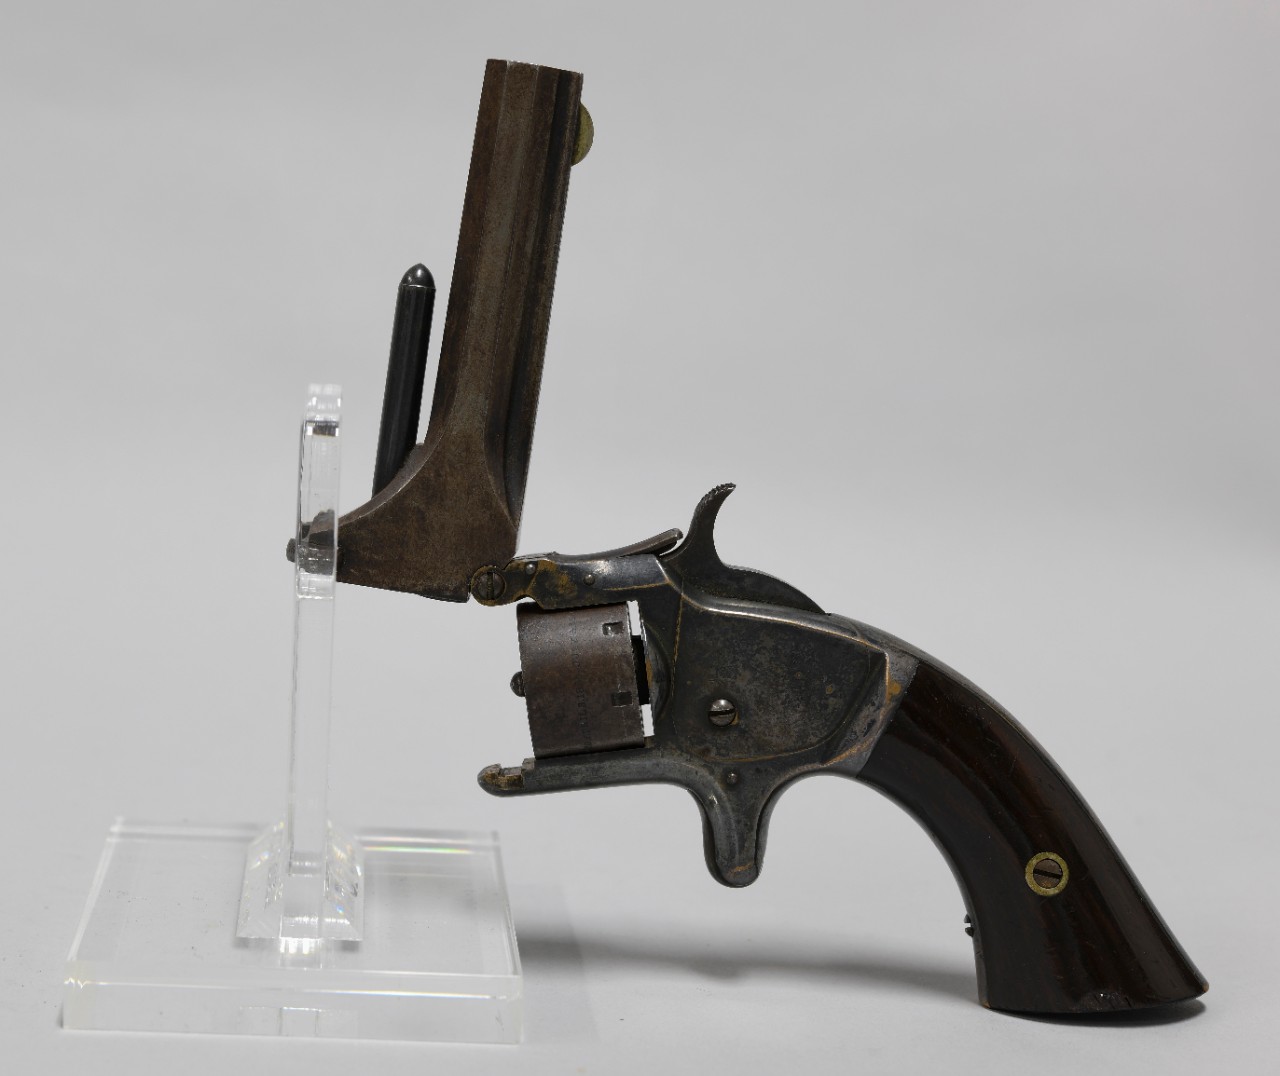 <p>Reverse view of .22 caliber Model No. 1 Smith &amp; Wesson bottom-break revolver. Metal frame with polished wood grip. Barrel opened.</p><p>&nbsp;</p><div style="left: -10000px; top: 0px; width: 9000px; height: 16px; overflow: hidden; position: absolute;"><div>&nbsp;</div></div>